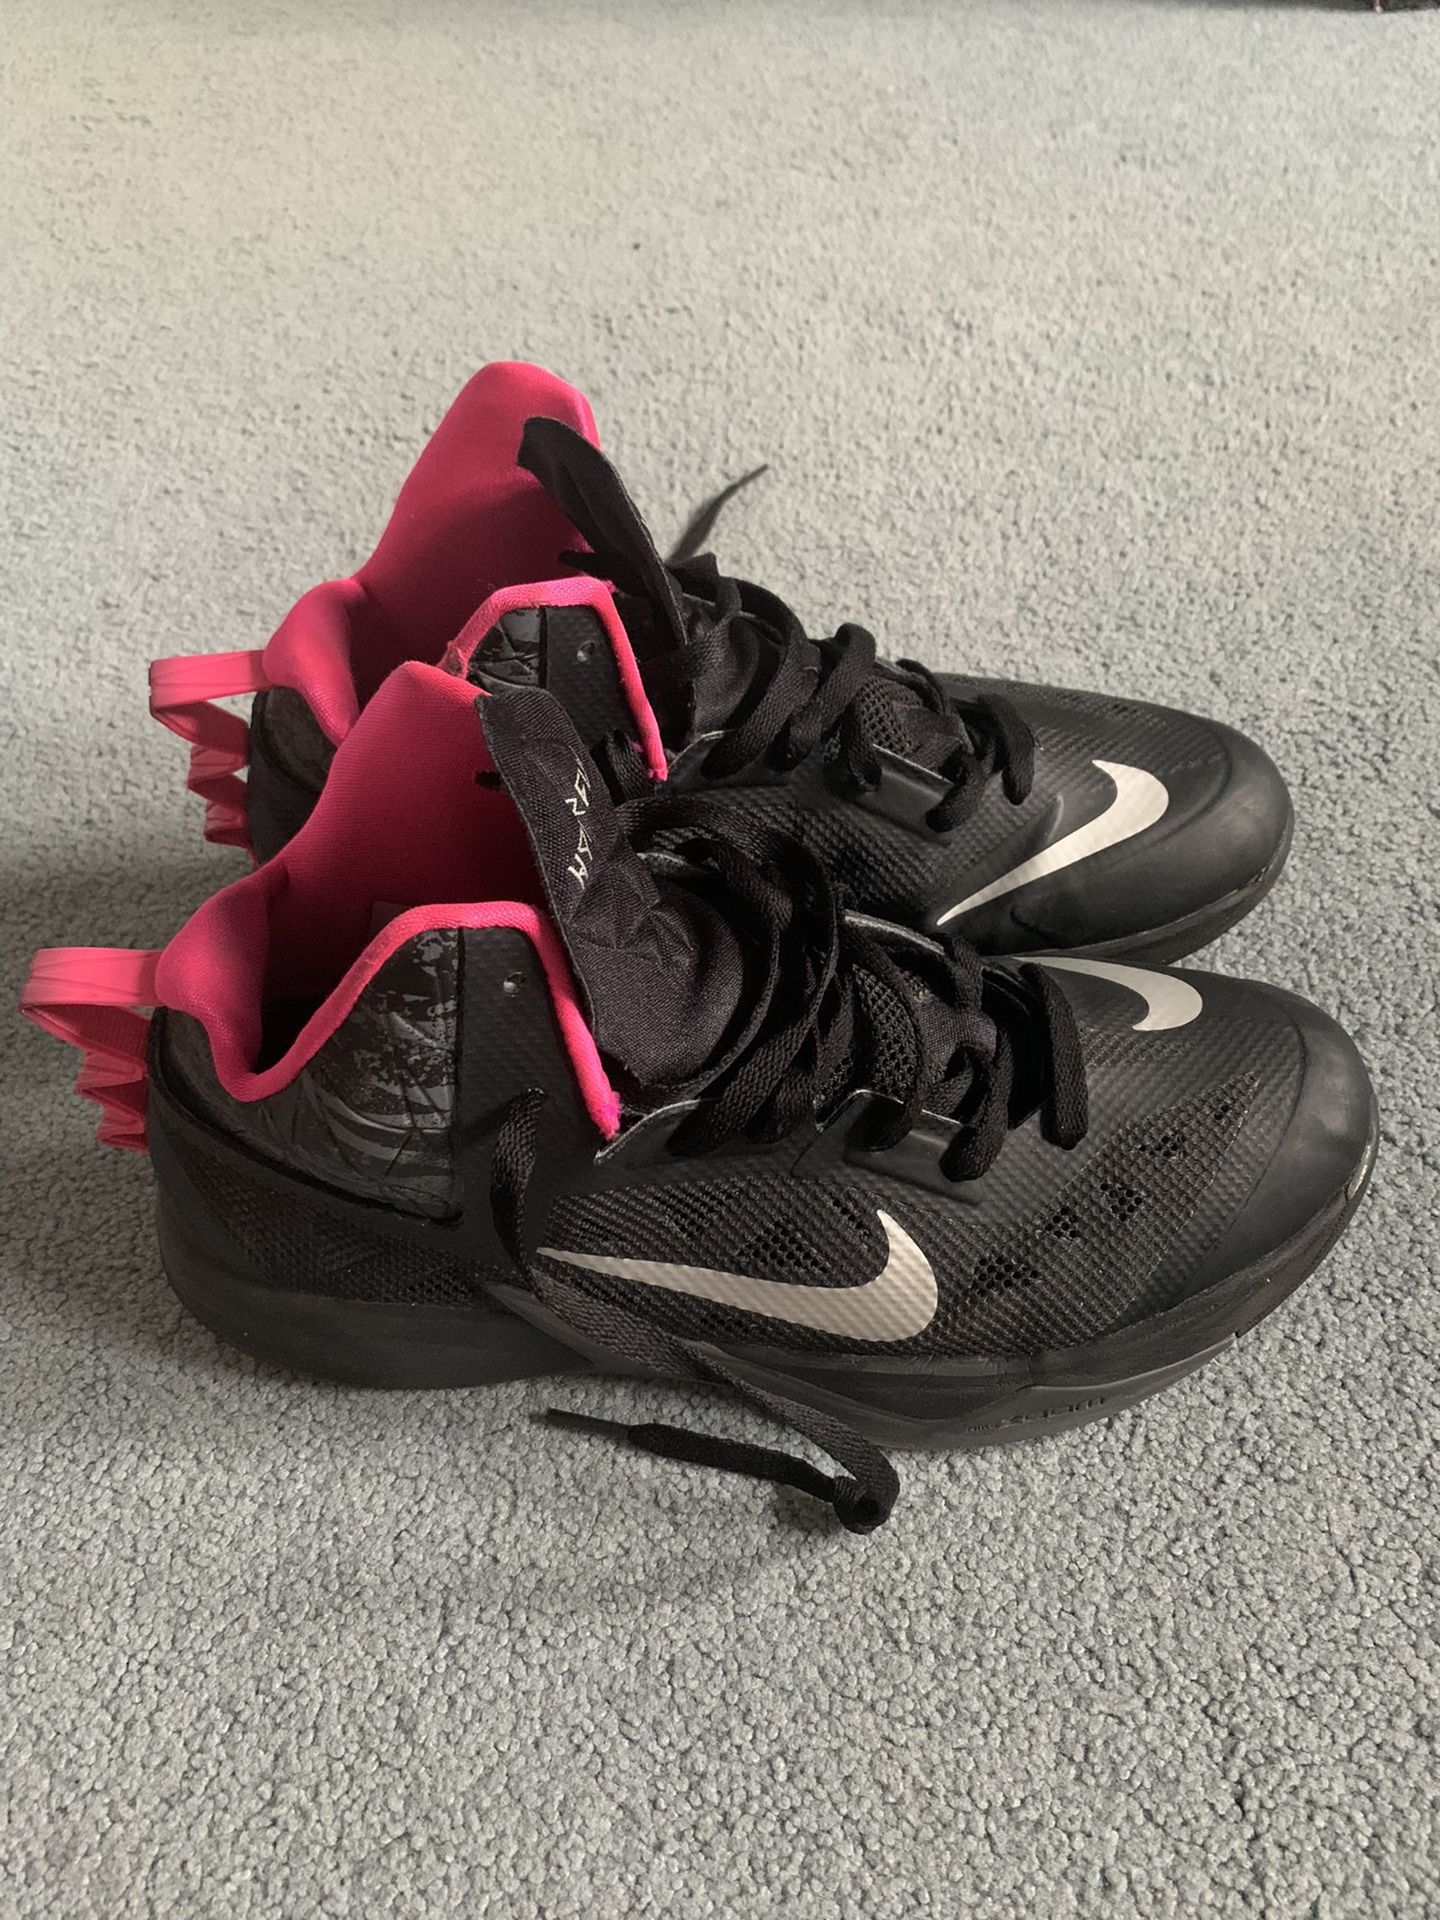 Nike Hyperfuse Basketball Shoes SZ 9 (Great Condition)